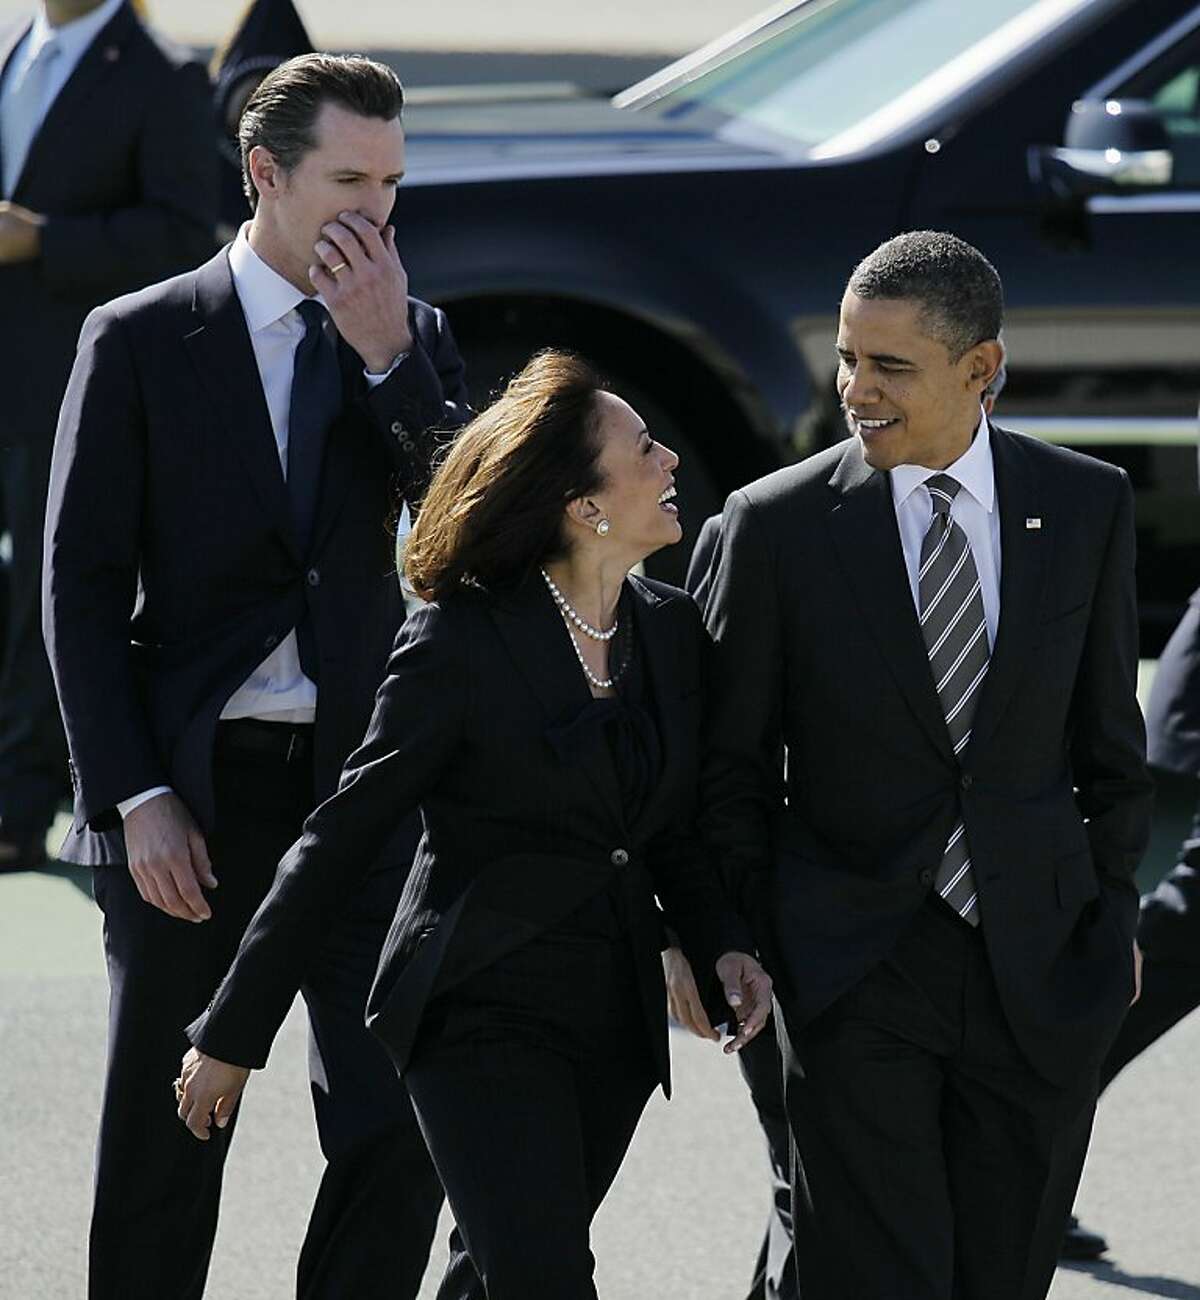 FILE -- in this Feb. 16, 2012 file photo President Barack Obama walks with California Attorney General Kamala Harris, center, and California Lt. Gov. Gavin Newsom, after arriving at San Francisco International Airport in San Francisco. Obama praised California's attorney general for more than her smarts and toughness at a Democratic Party event Thursday, April 4, 2013. The president also commended Harris for being "the best-looking attorney general" during a Democratic fundraising lunch in the Silicon Valley. (AP Photo/Eric Risberg, File)